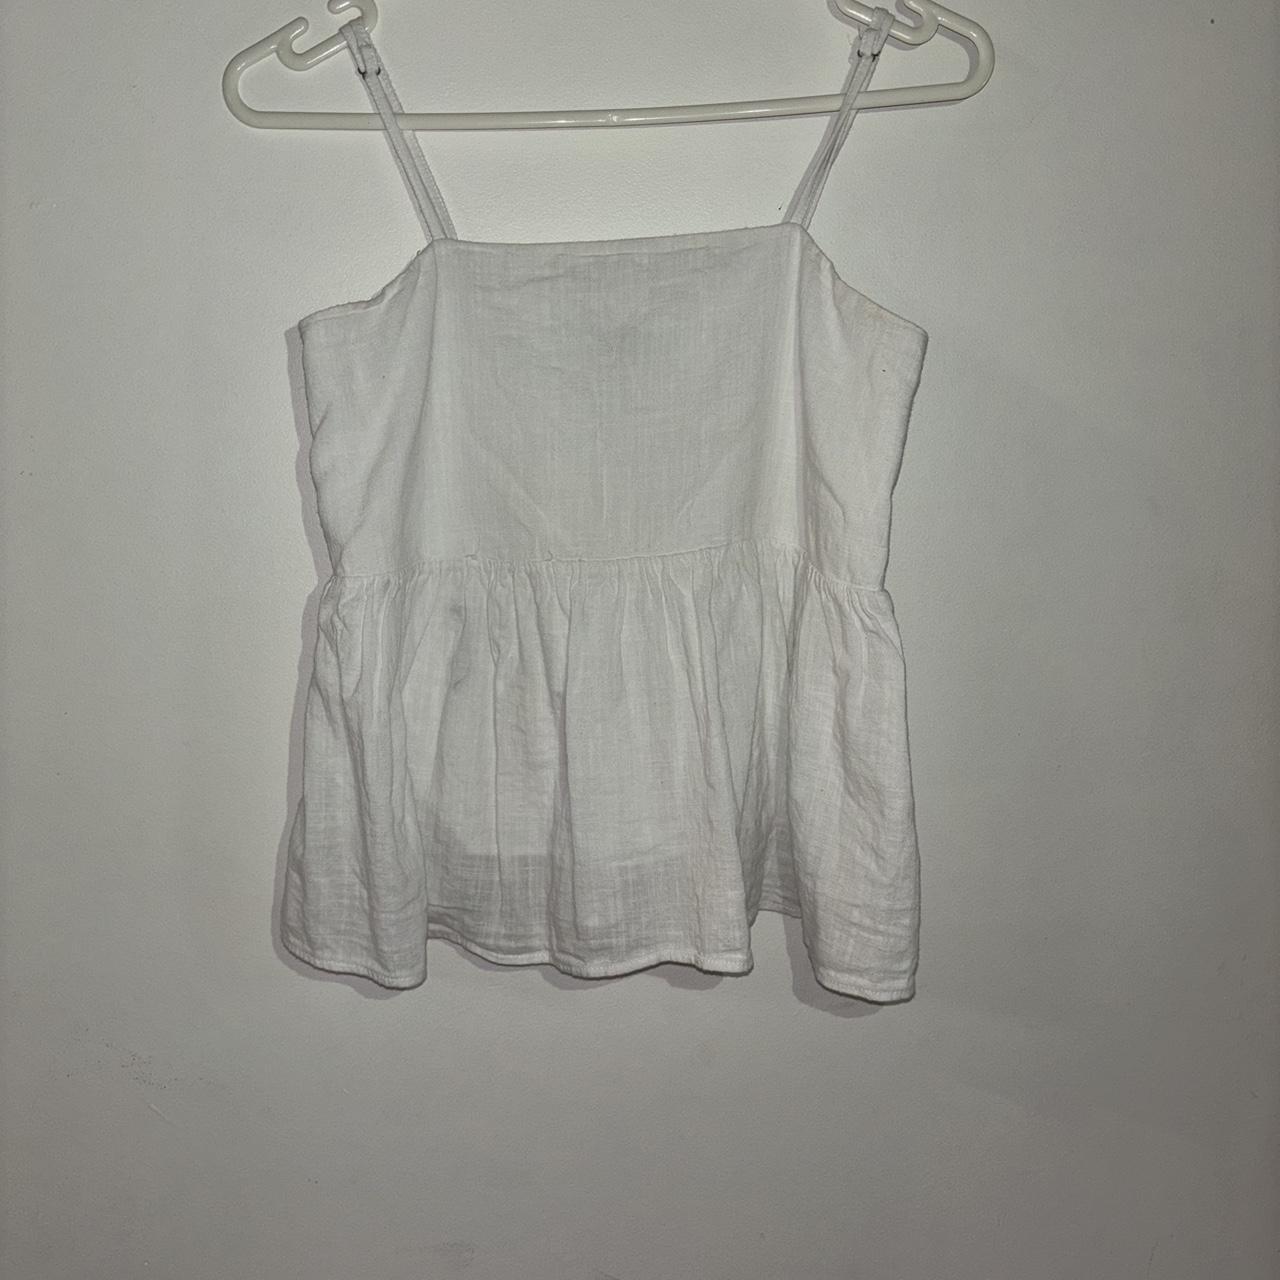 Perfect stranger White top Great condition Size 6 $15 - Depop